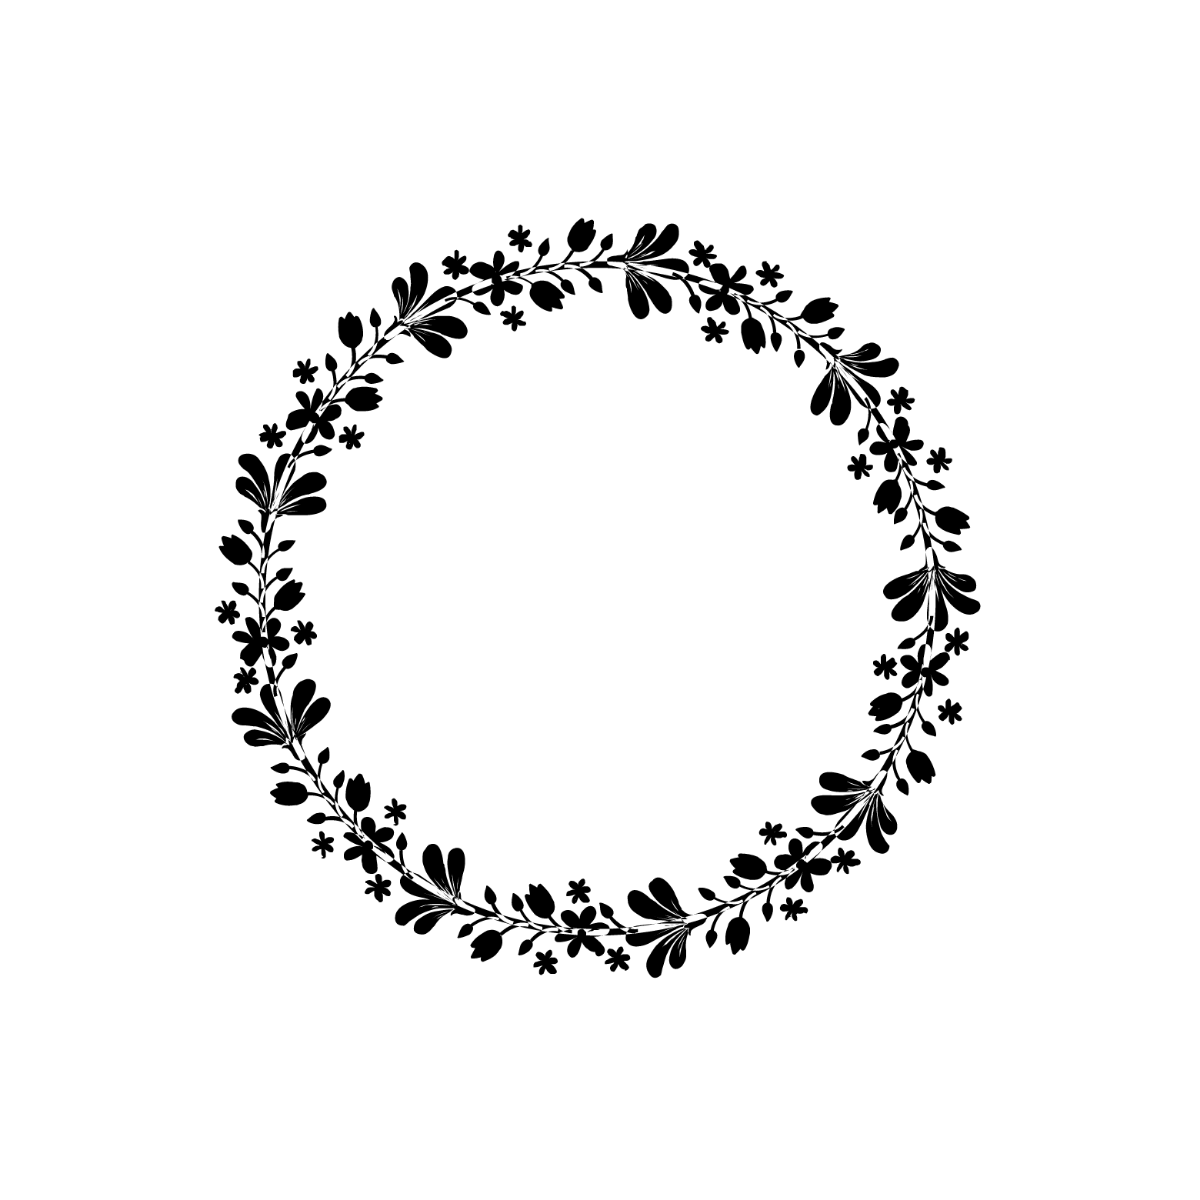 Black and White Floral Wreath Vector